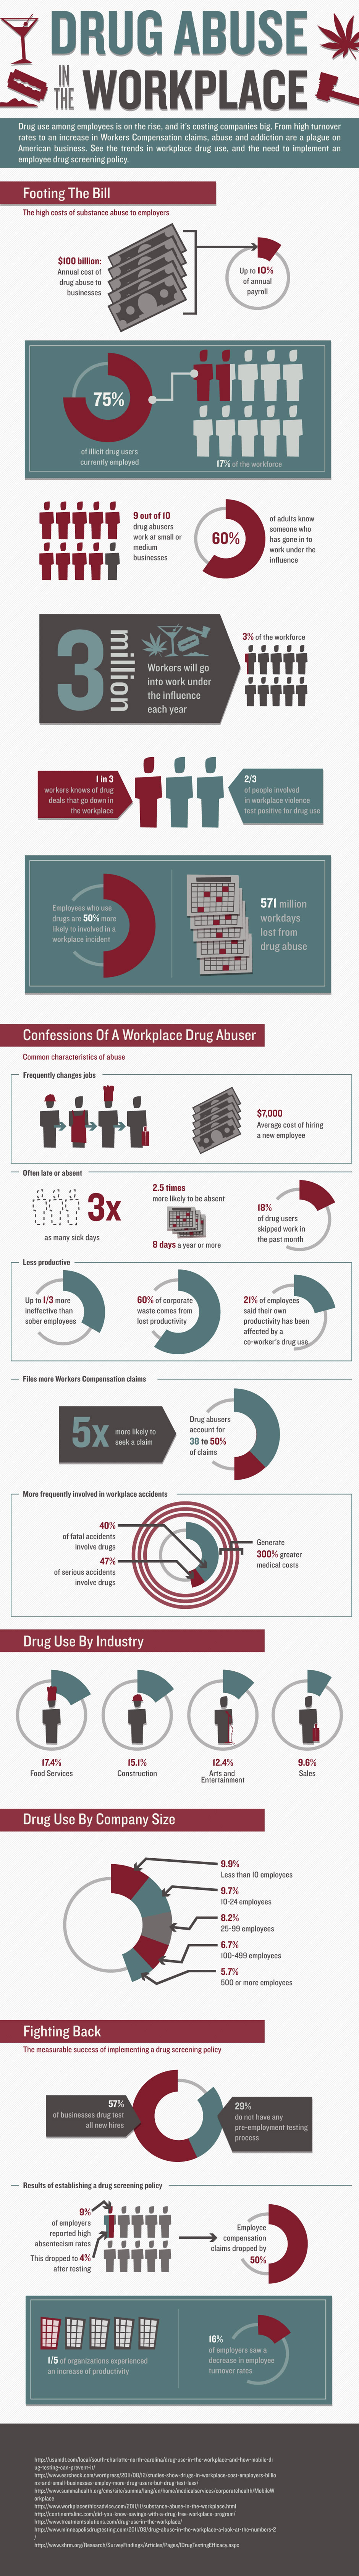 InfoGraphic on Drug Abuse in the Workplace,